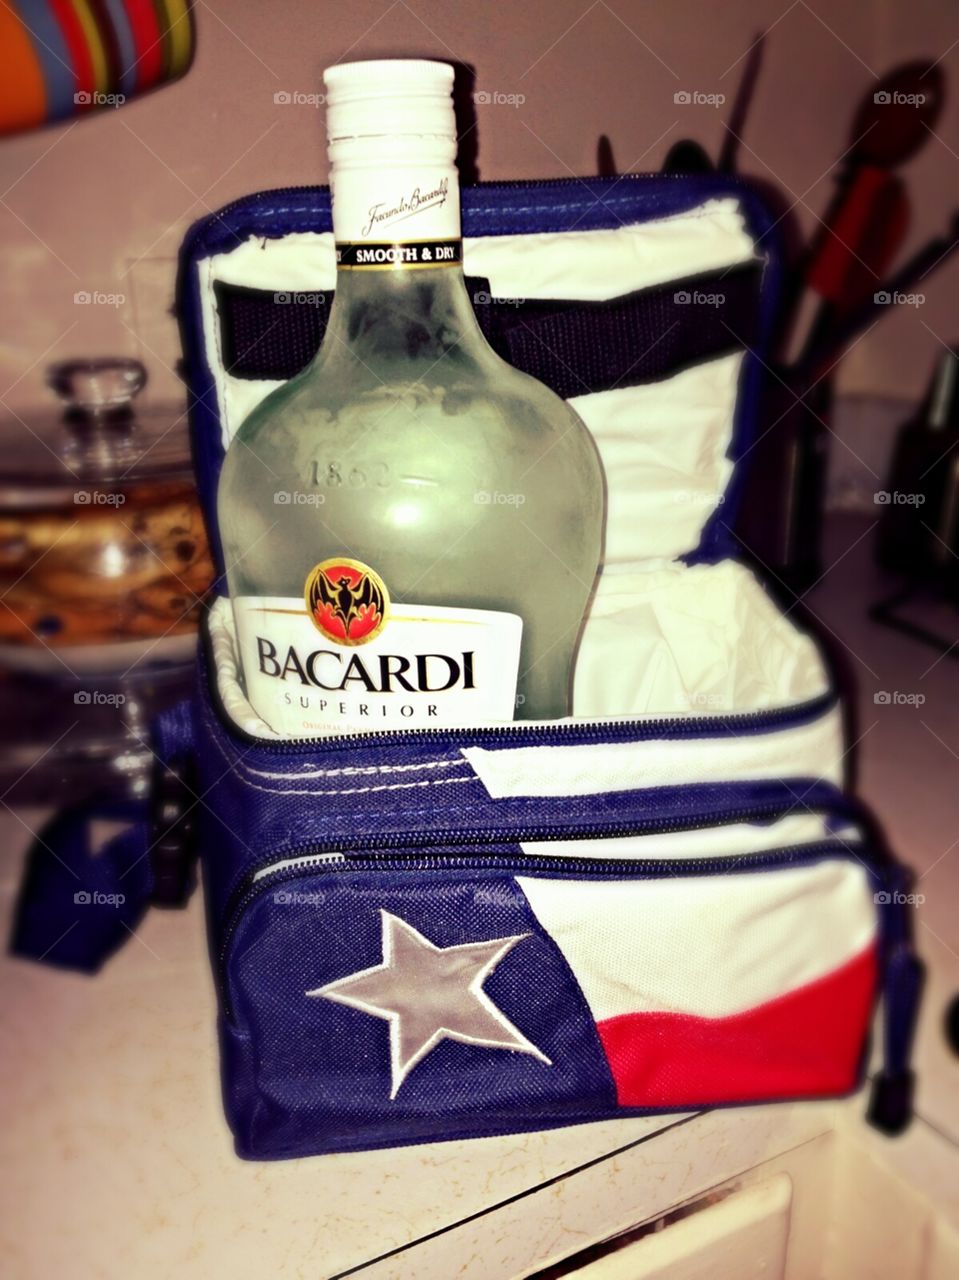 Bacardi, it's what's for lunch. Asked my hubby to pack my lunch bag, was not disappointed